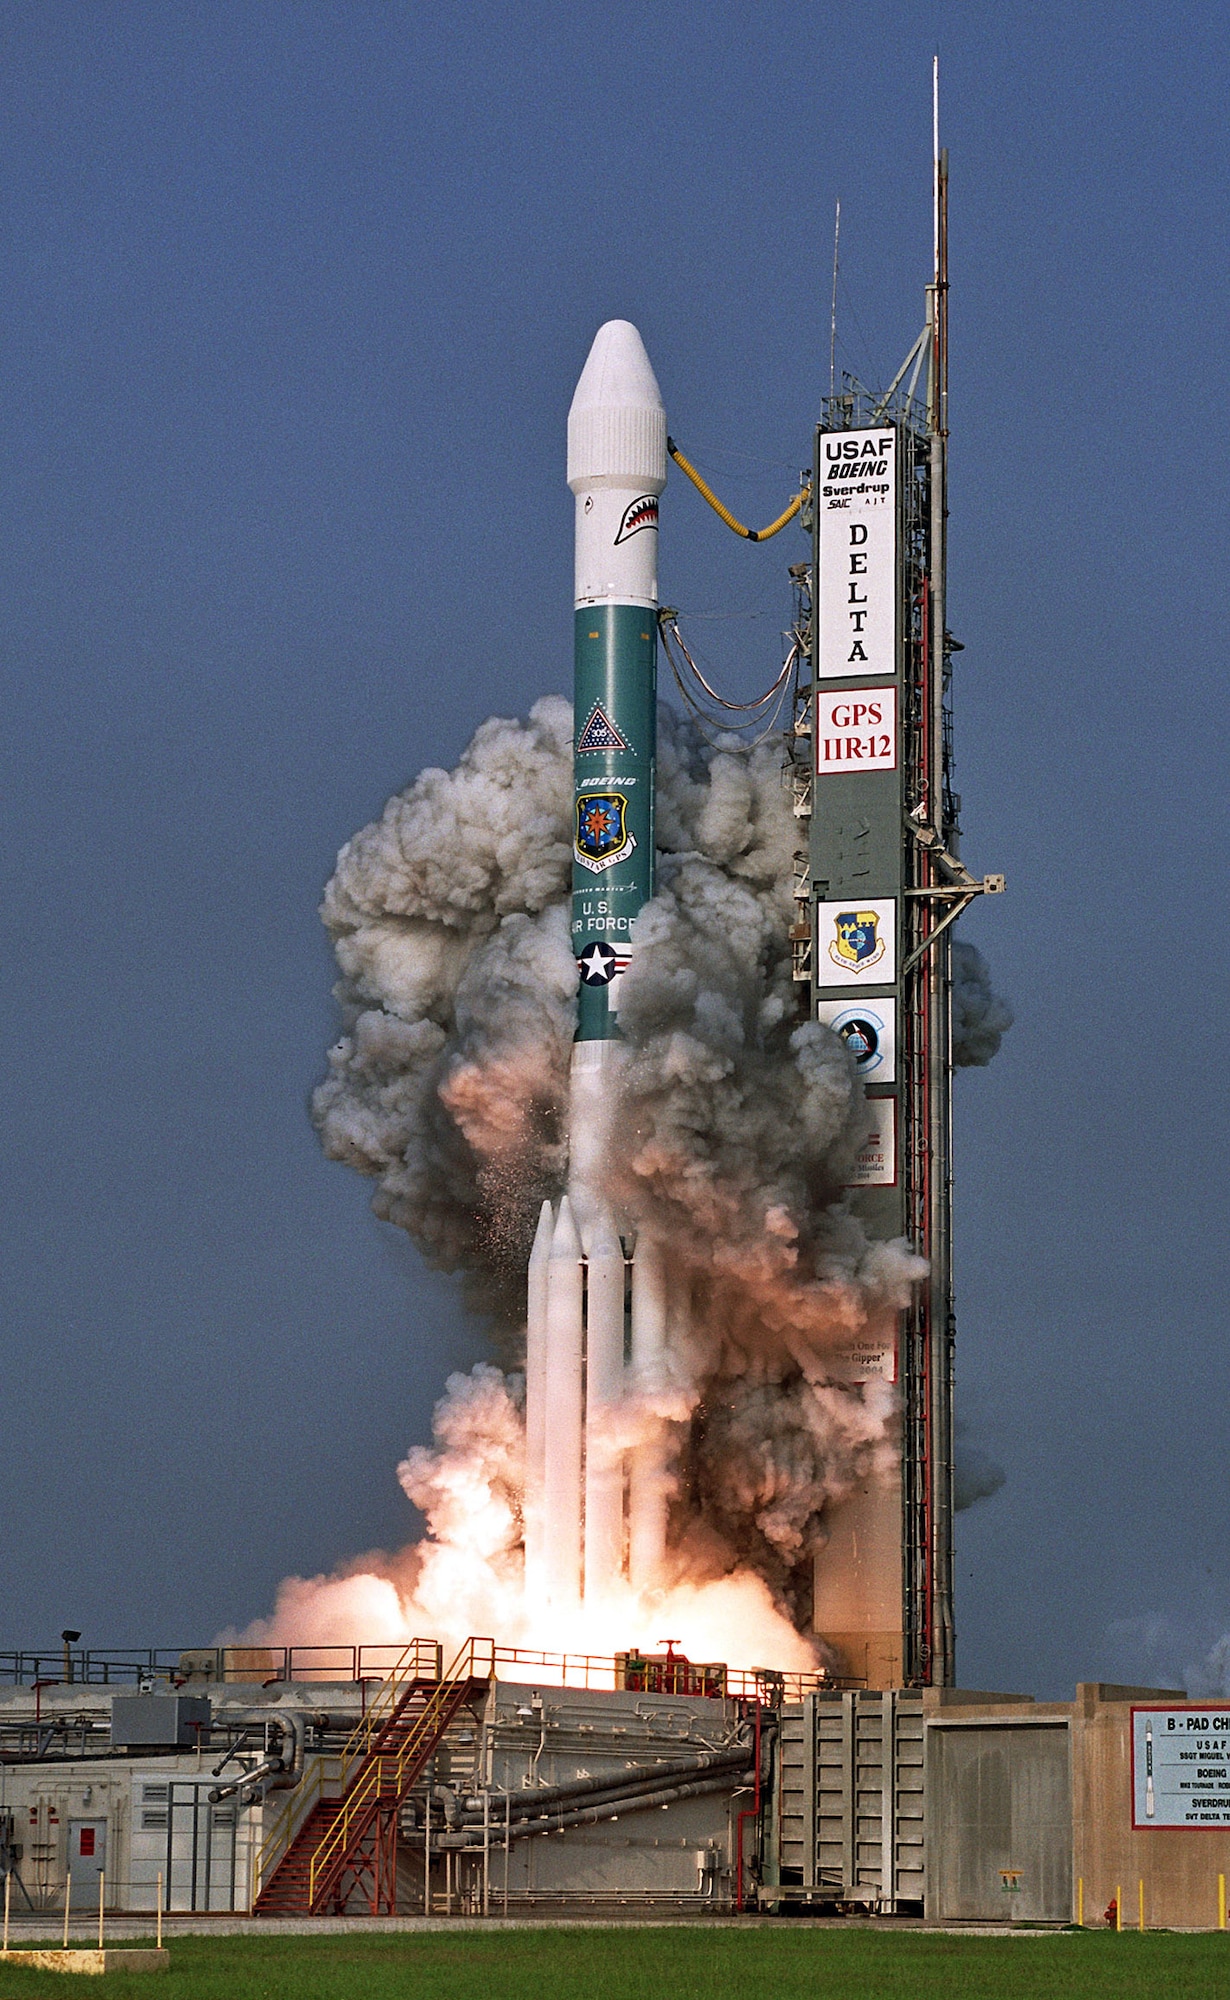 CAPE CANAVERAL AIR FORCE STATION, Fla. -- A Boeing Delta II rocket lifts off from here June 23 carrying a replacement satellite for the Air Force's Global Positioning System into orbit.  The Delta II is a three-stage launch vehicle.  (U.S. Air Force photo by Carleton Bailie)